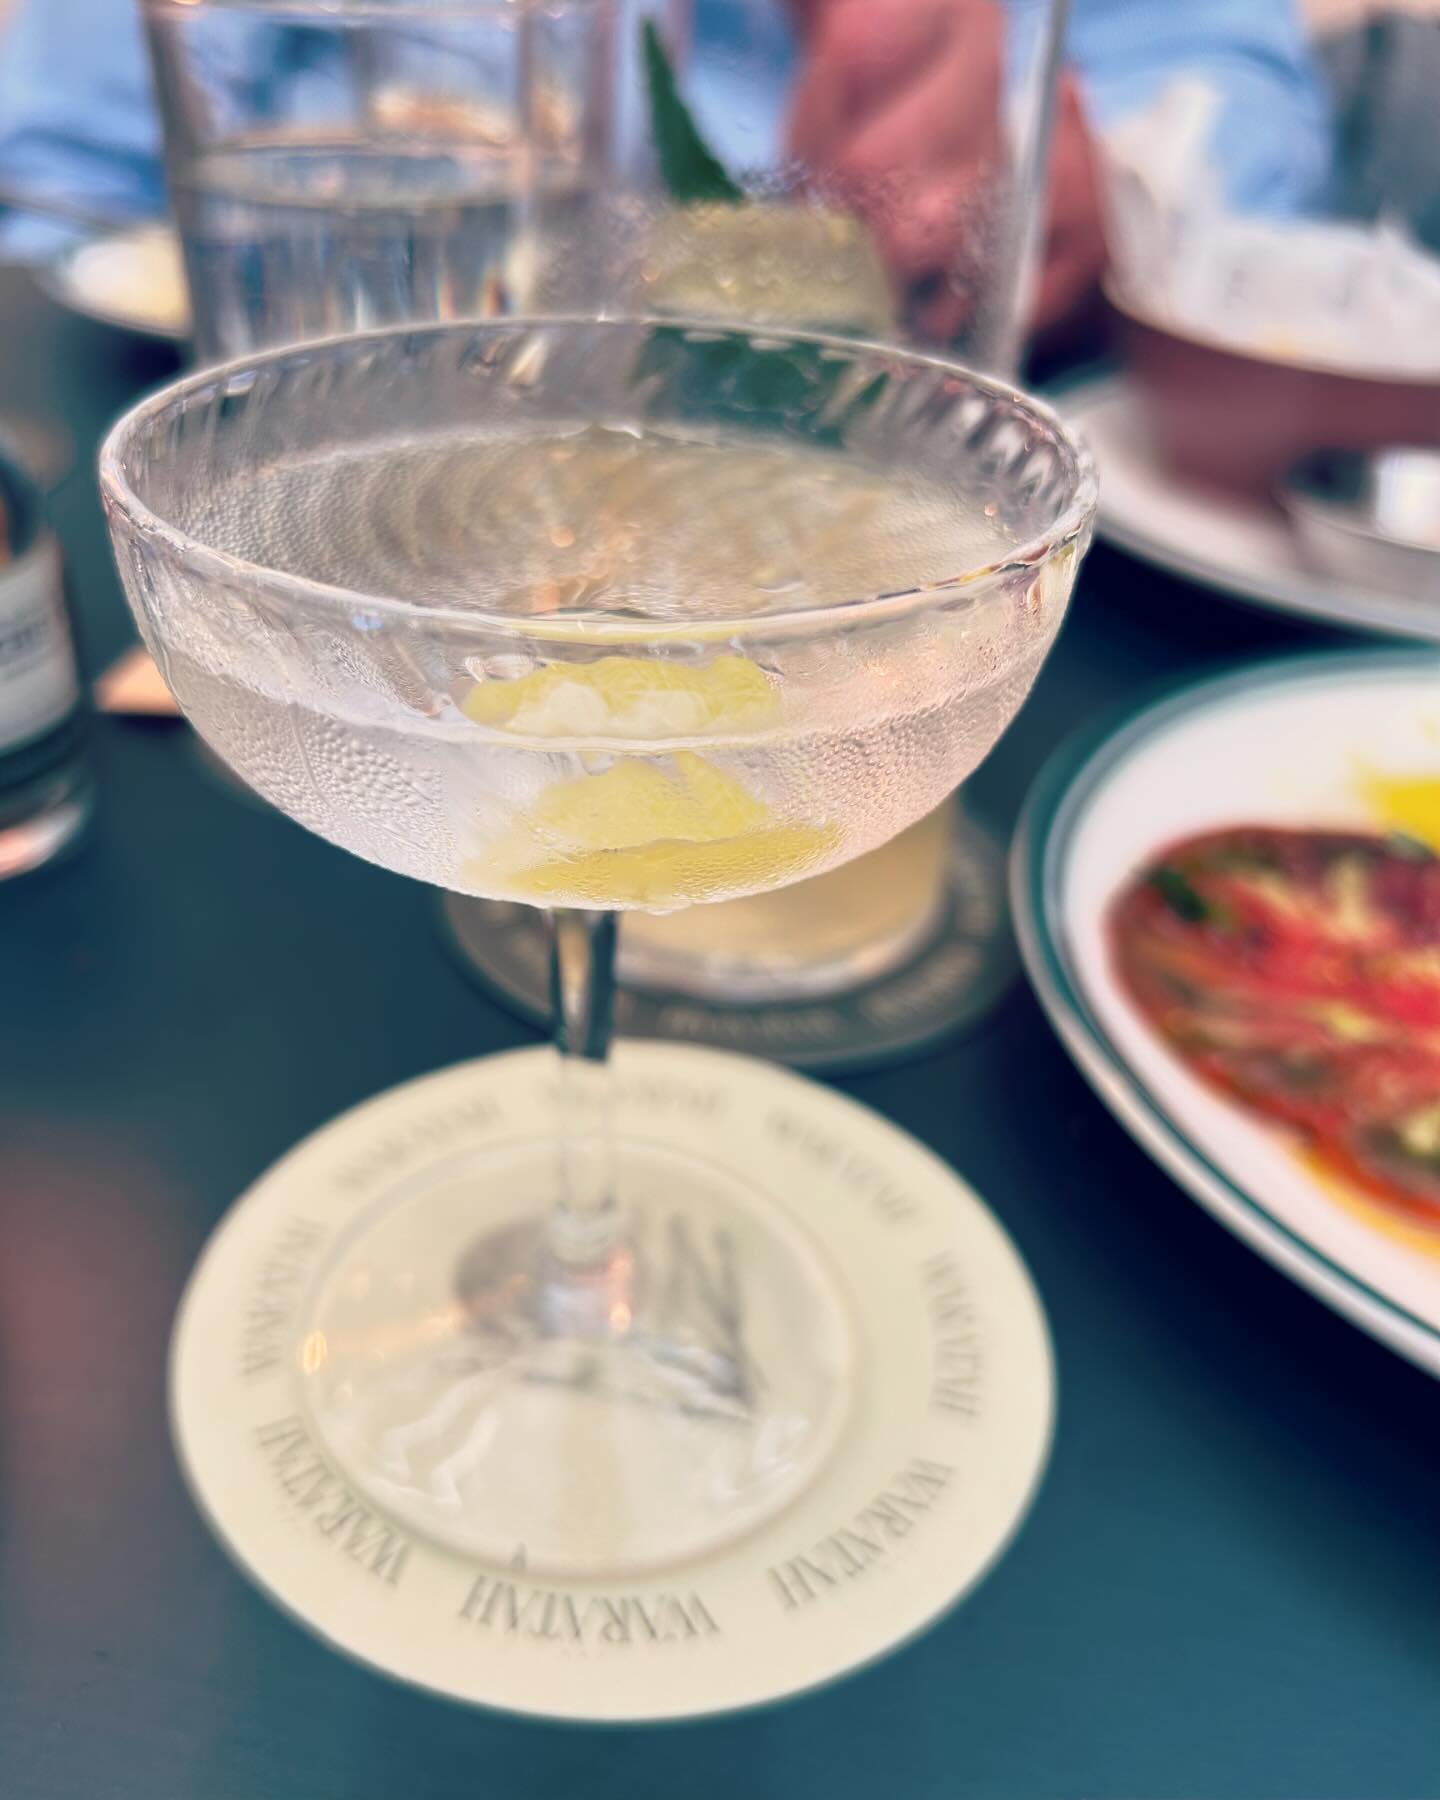 Seems like a lifetime ago, but in March I had the pleasure of attending the IWD Women In Distilling lunch @thewaratahsydney with the awesome @sophisticatedcocktailco . Scrolling back through pics from the whirlwind that has been the last few months, 